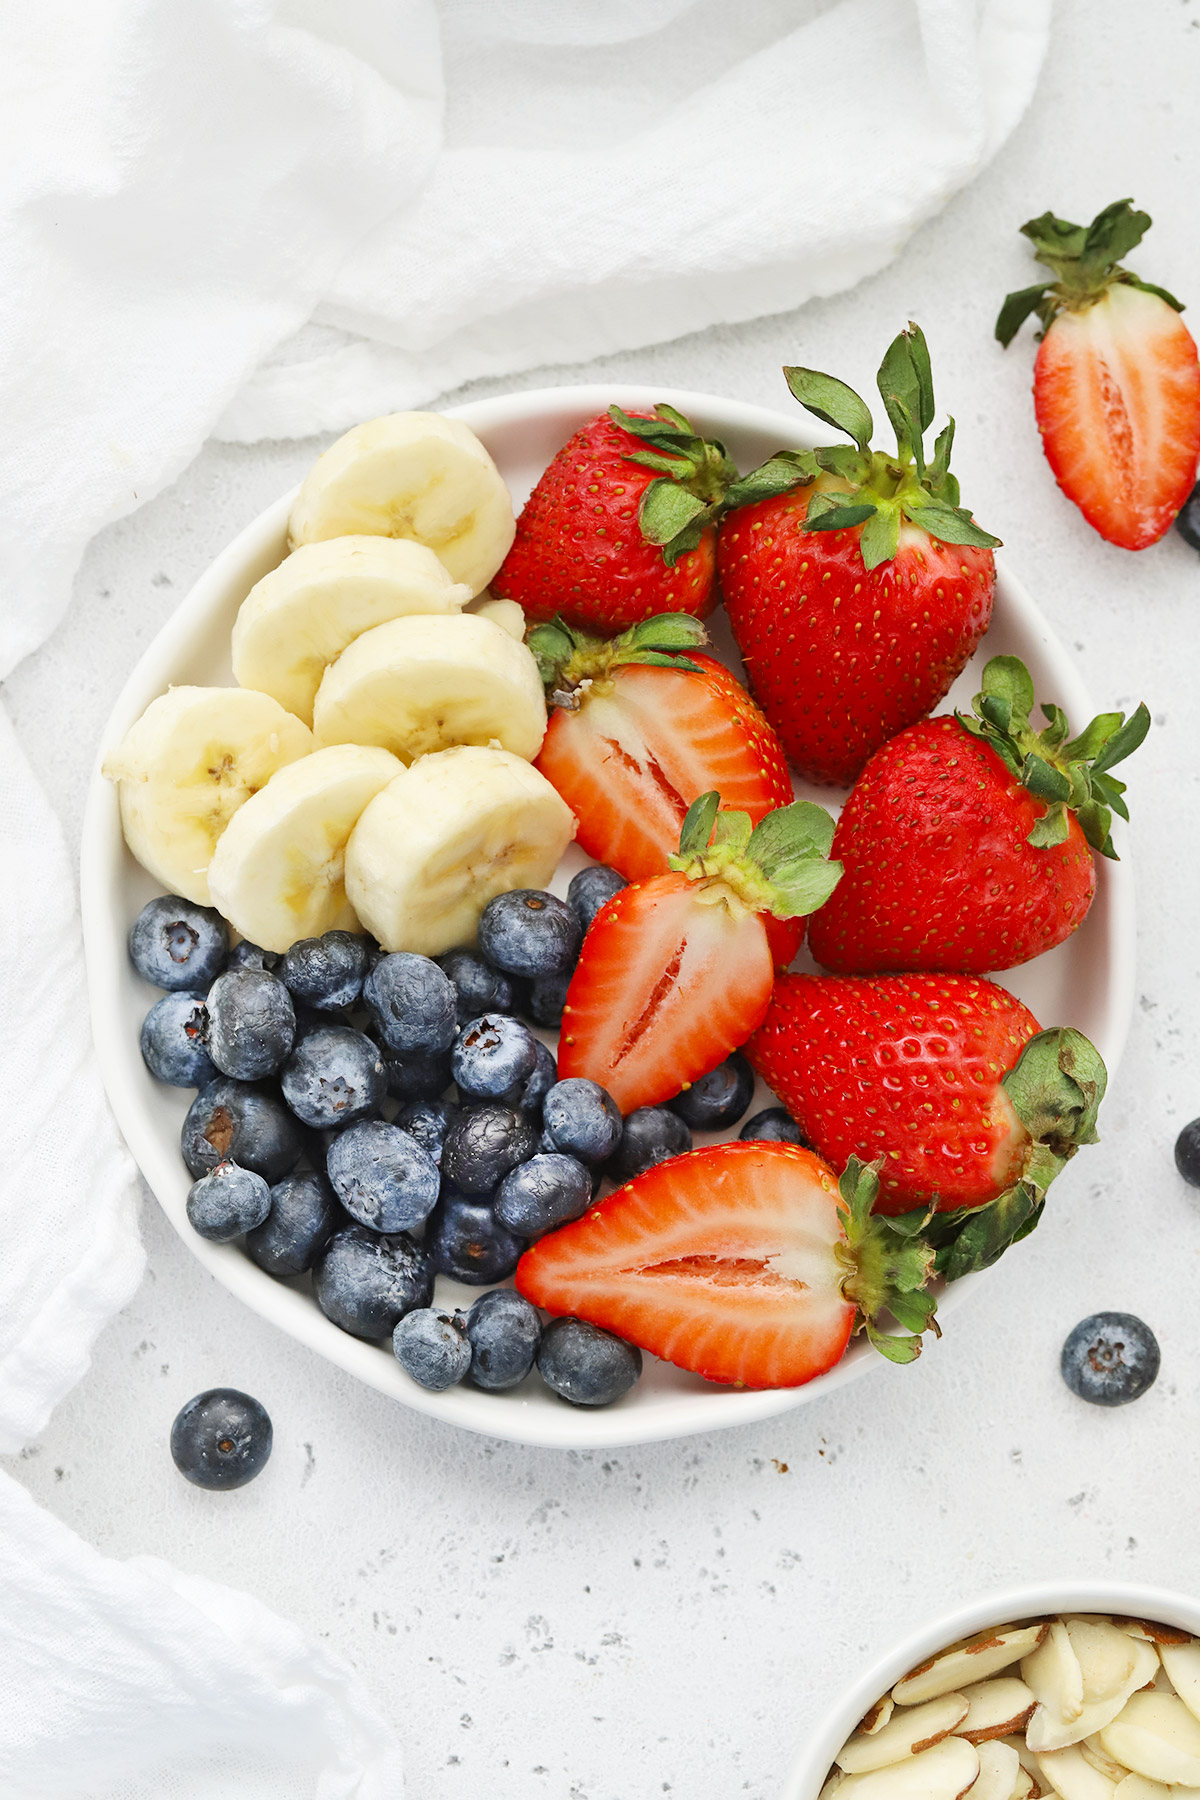 Overhead view of fresh berries and sliced bananas on a plate with a white background